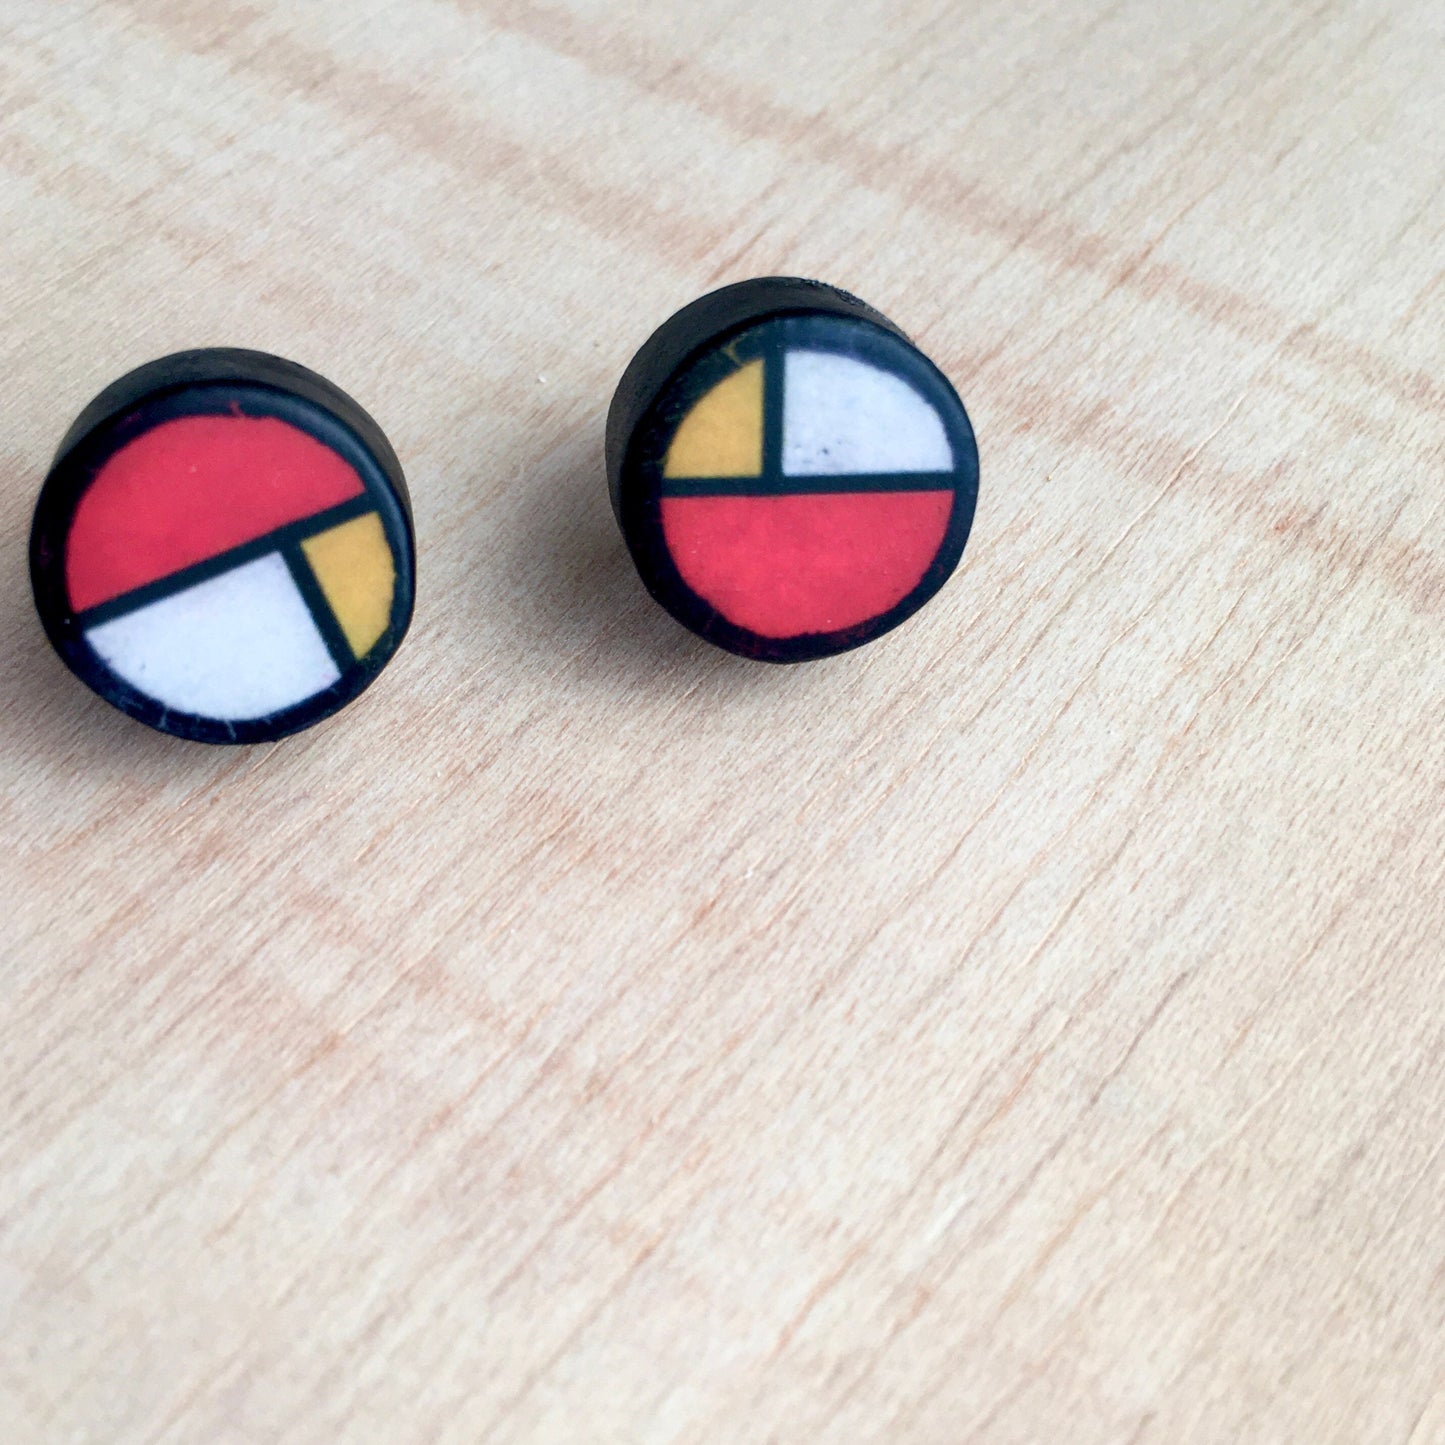 Mondrian men’s earrings. Sterling silver and sustainable wood stud earrings. Father’s Day gift.